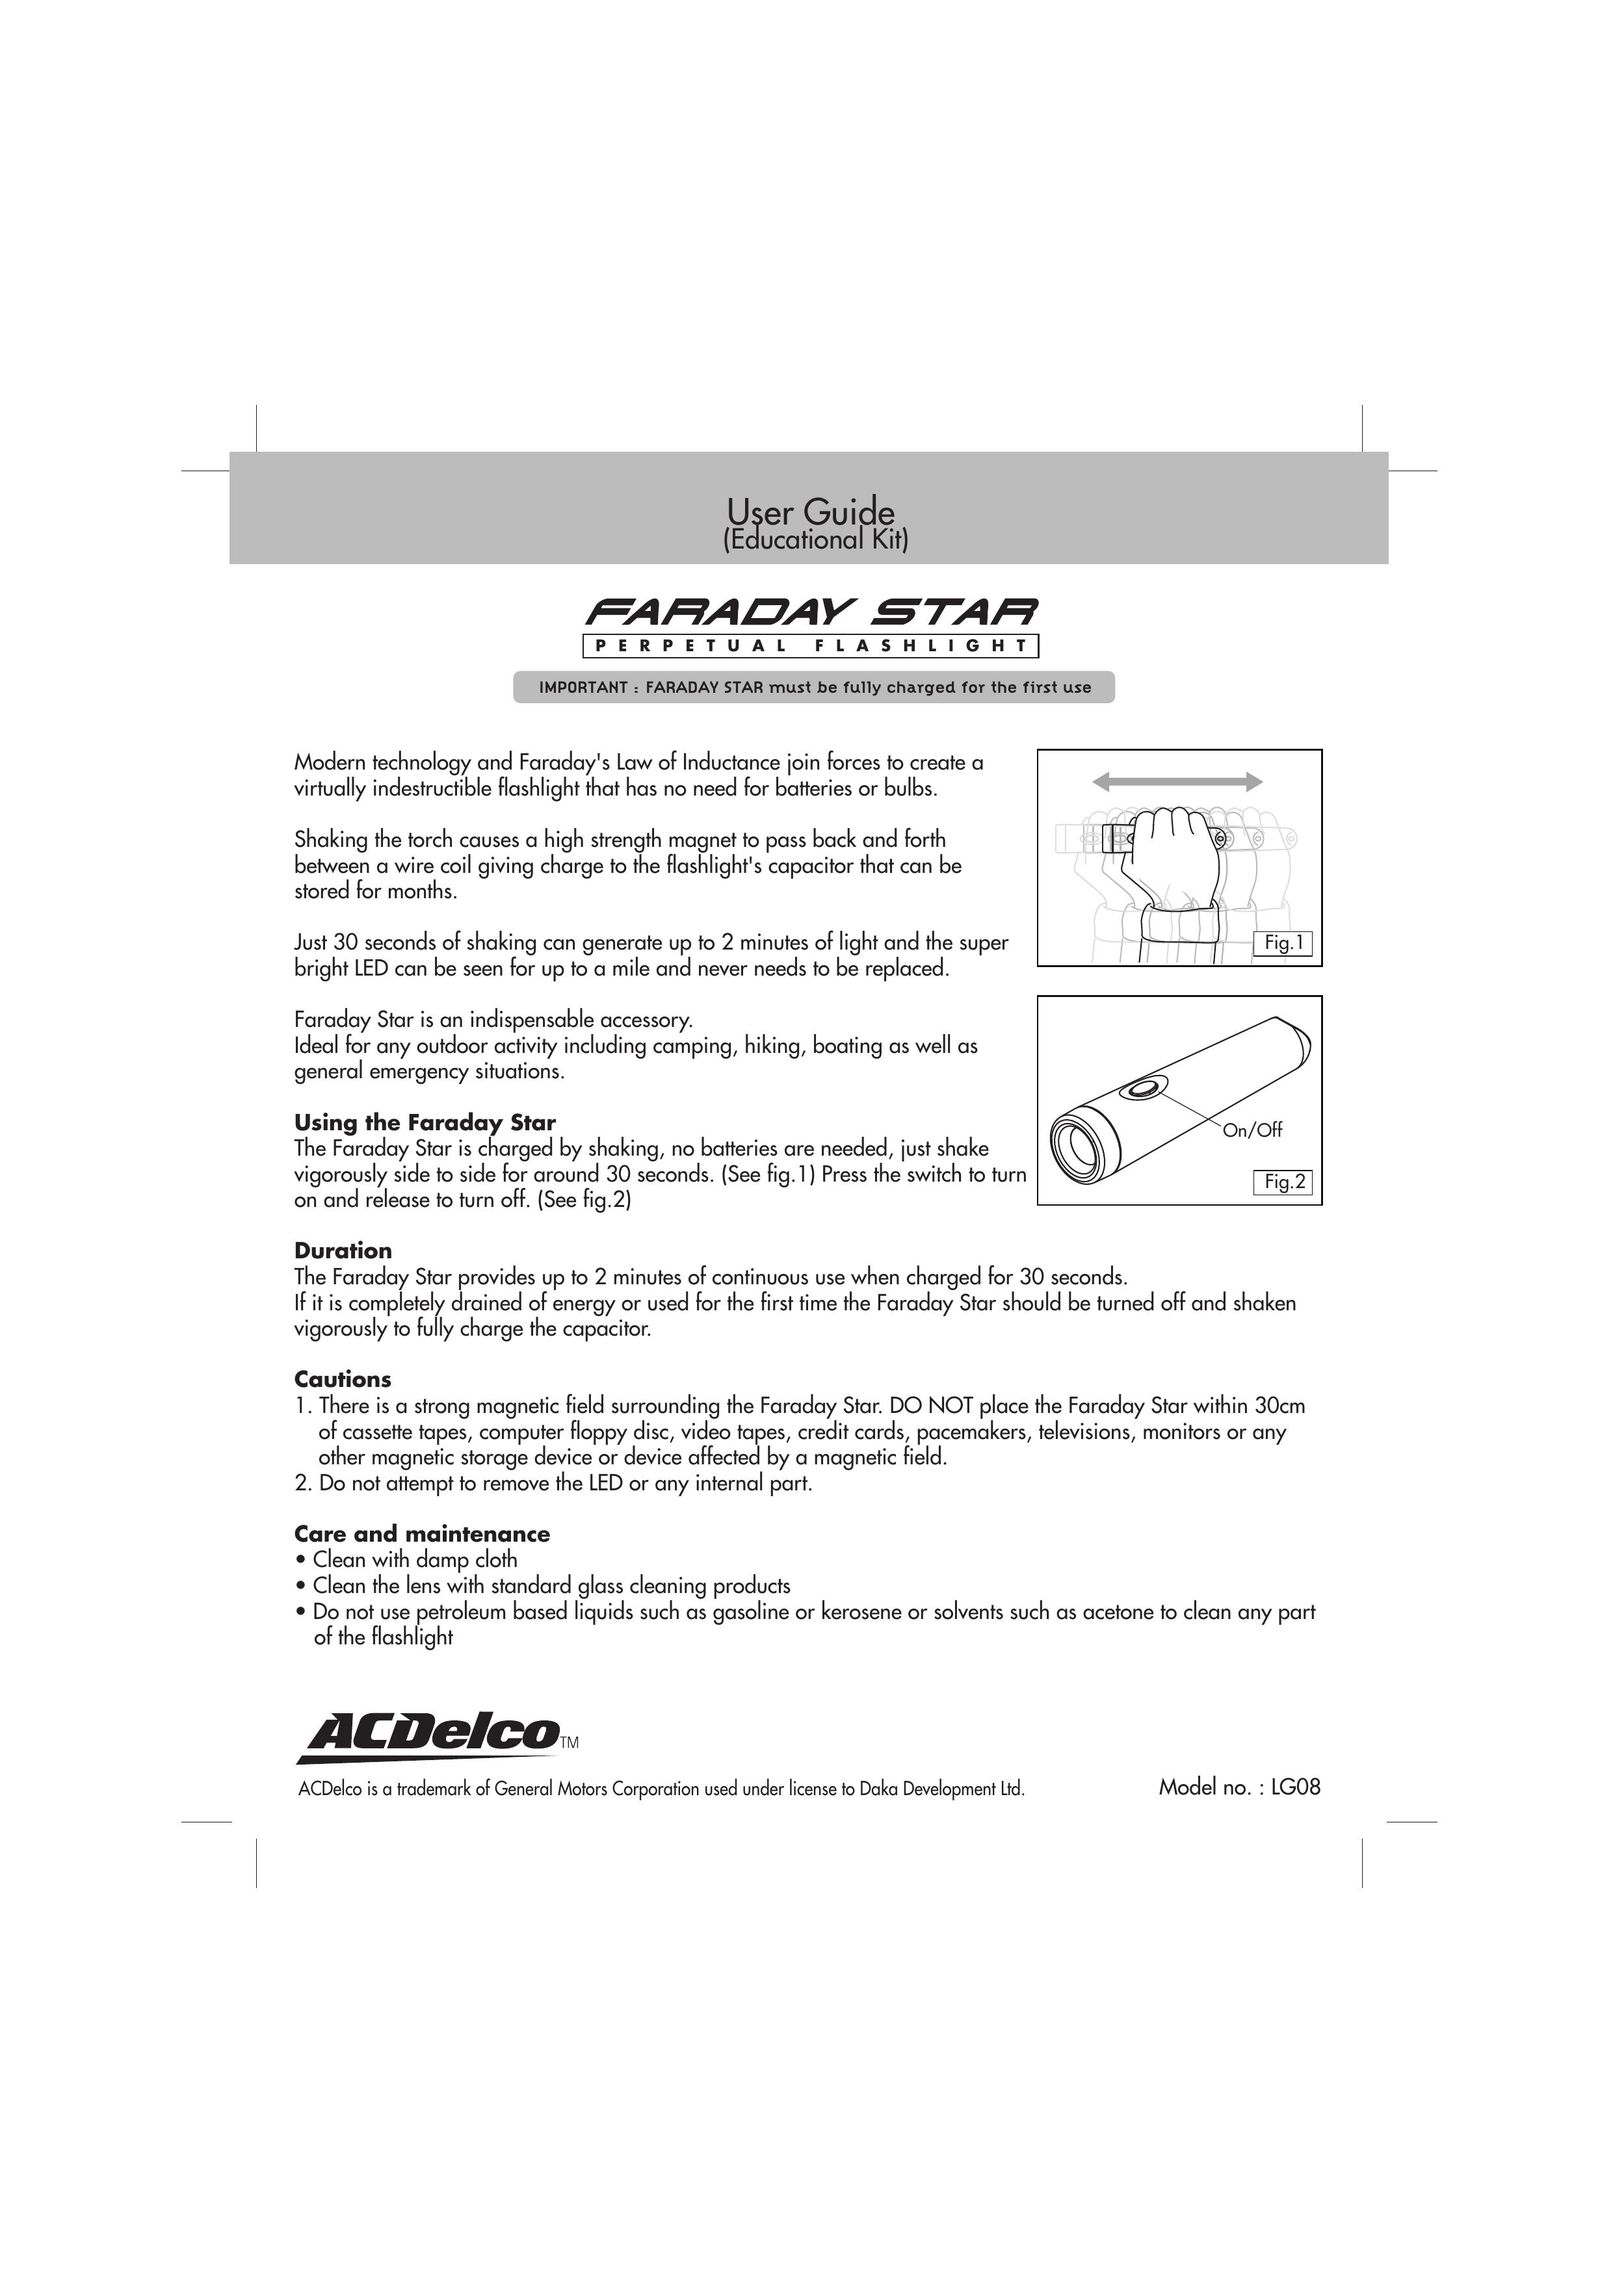 ACDelco LG08 Home Safety Product User Manual